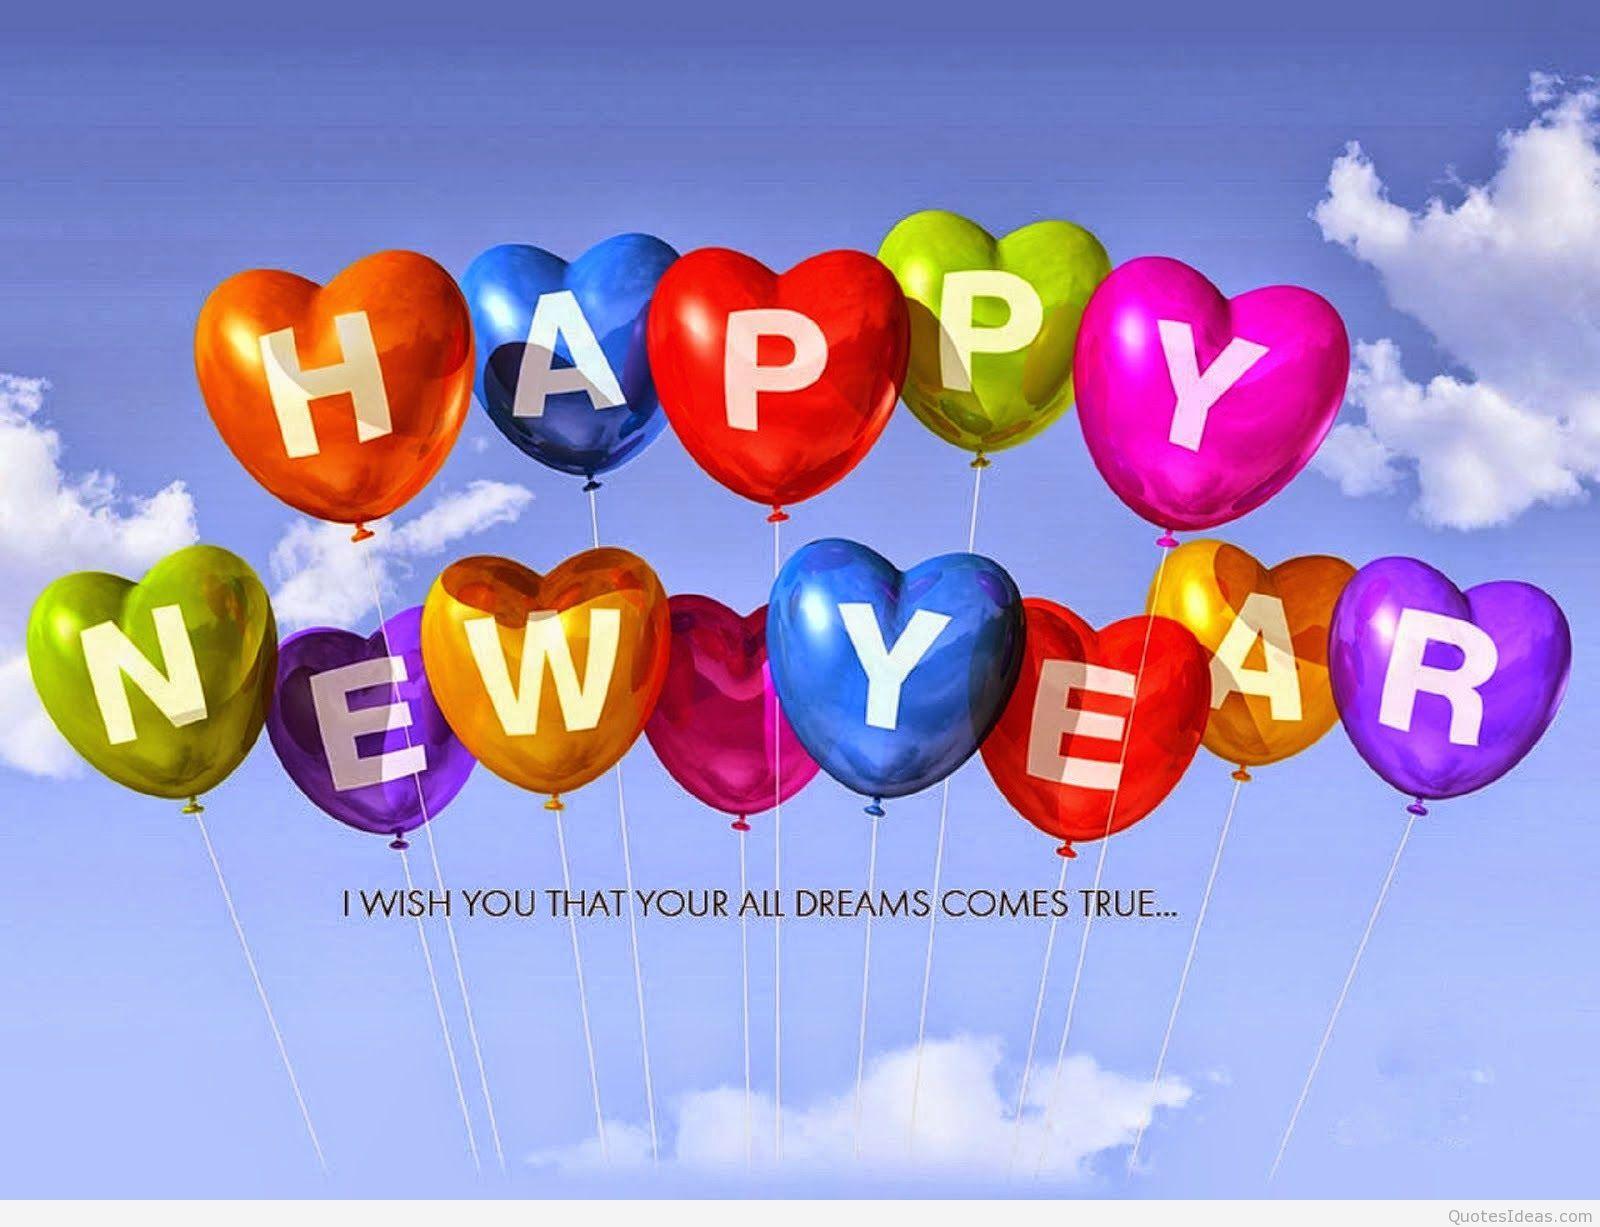 Best Collection of Happy New Year Wallpaper 2016 Free Download